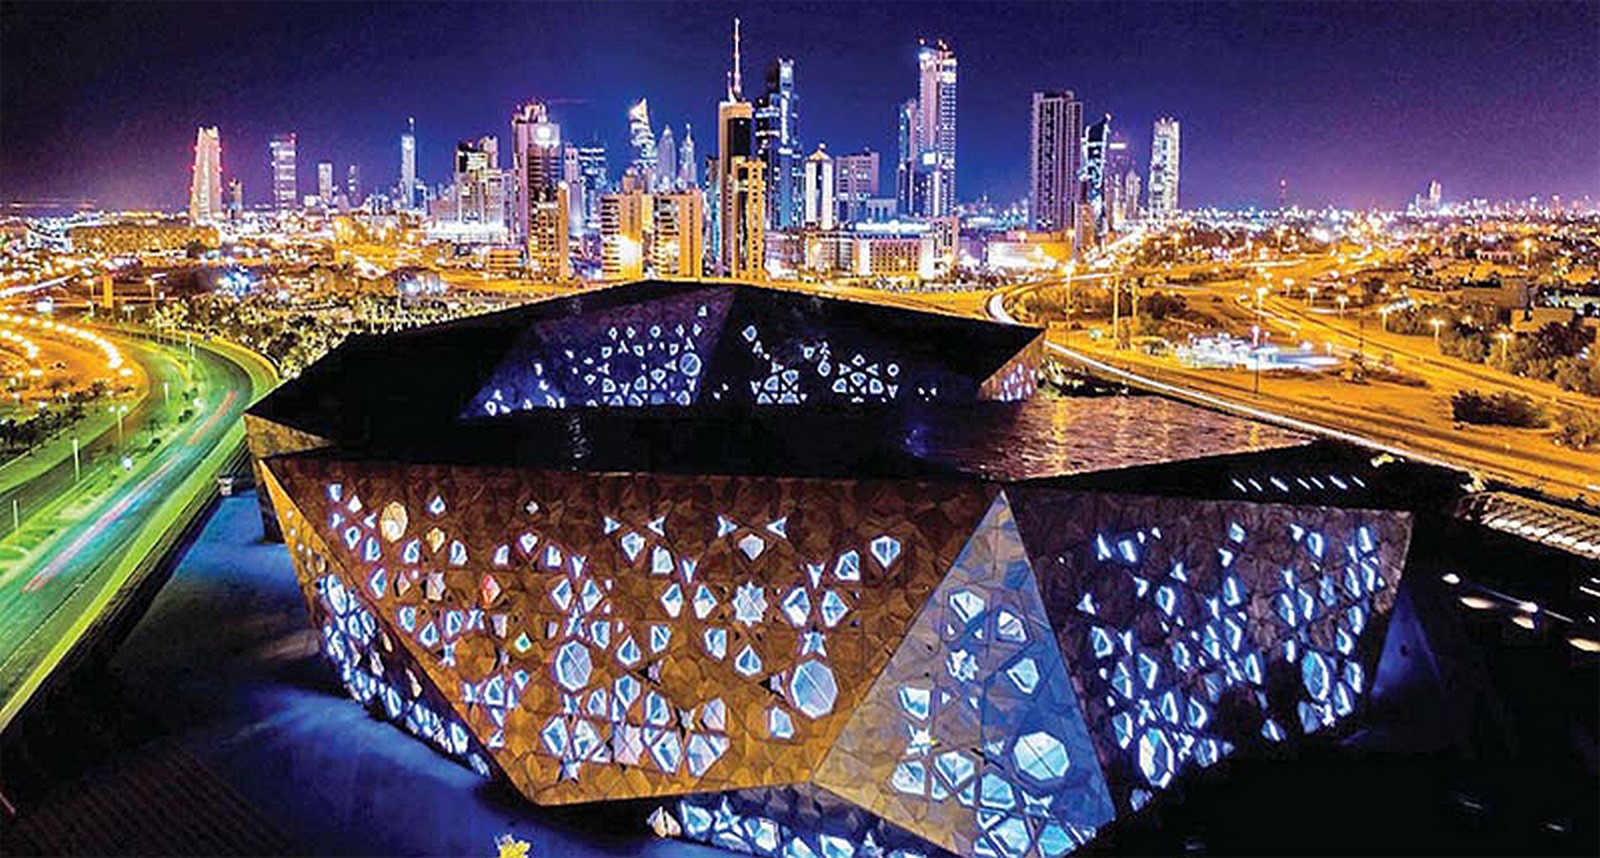 15 Places to visit in Kuwait for the Travelling Architect - Sheet31